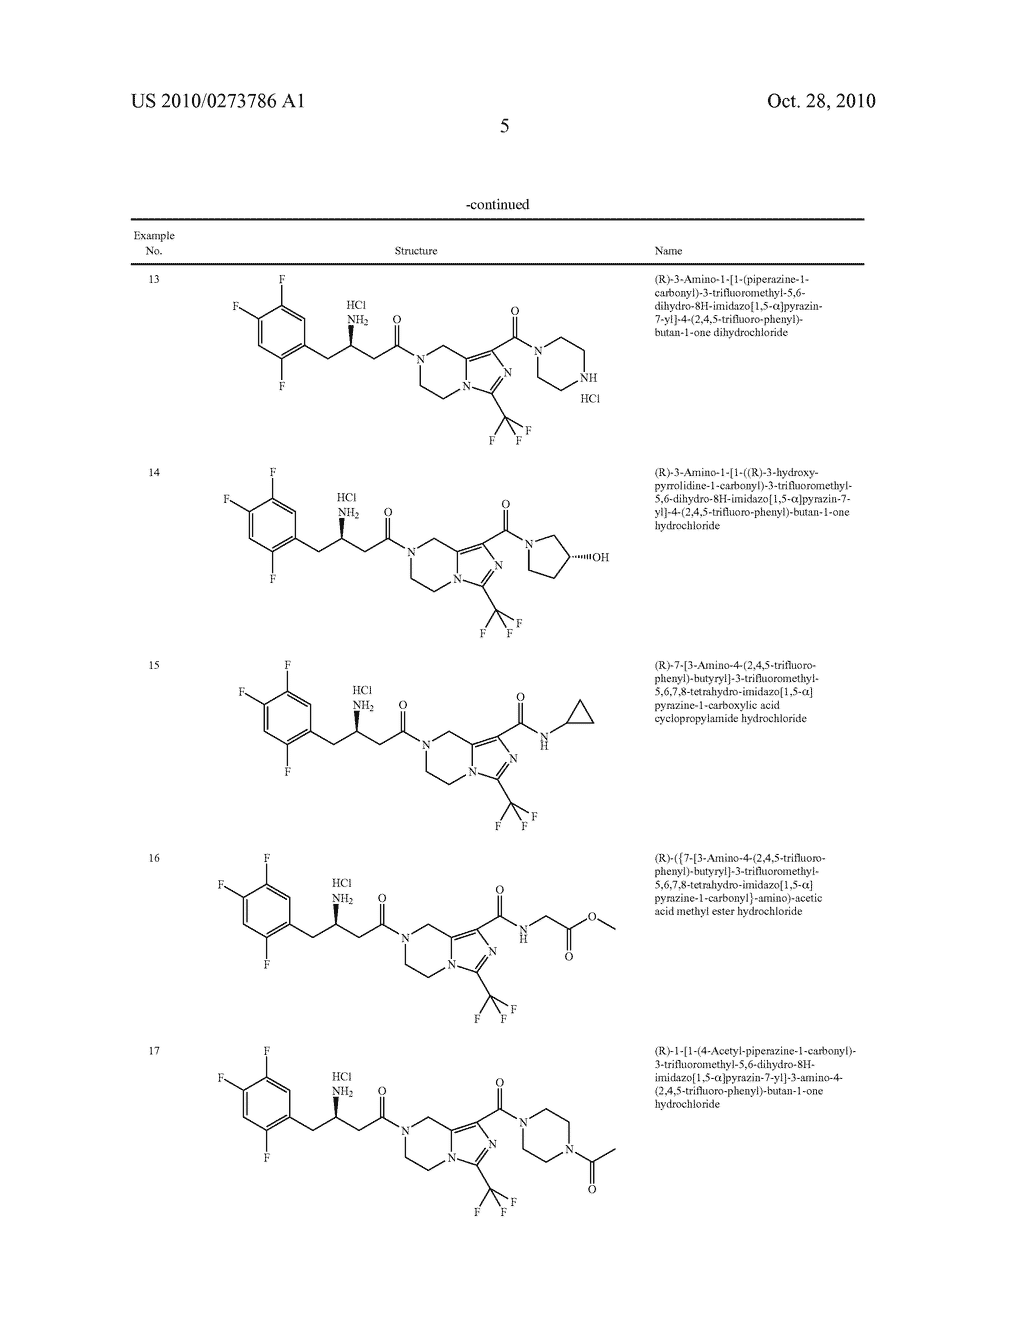 TETRAHYDRO-IMIDAZ0[1,5-A]PYRAZINE DERIVATIVES, PREPARATION PROCESS AND MEDICINAL USE THEREOF - diagram, schematic, and image 06